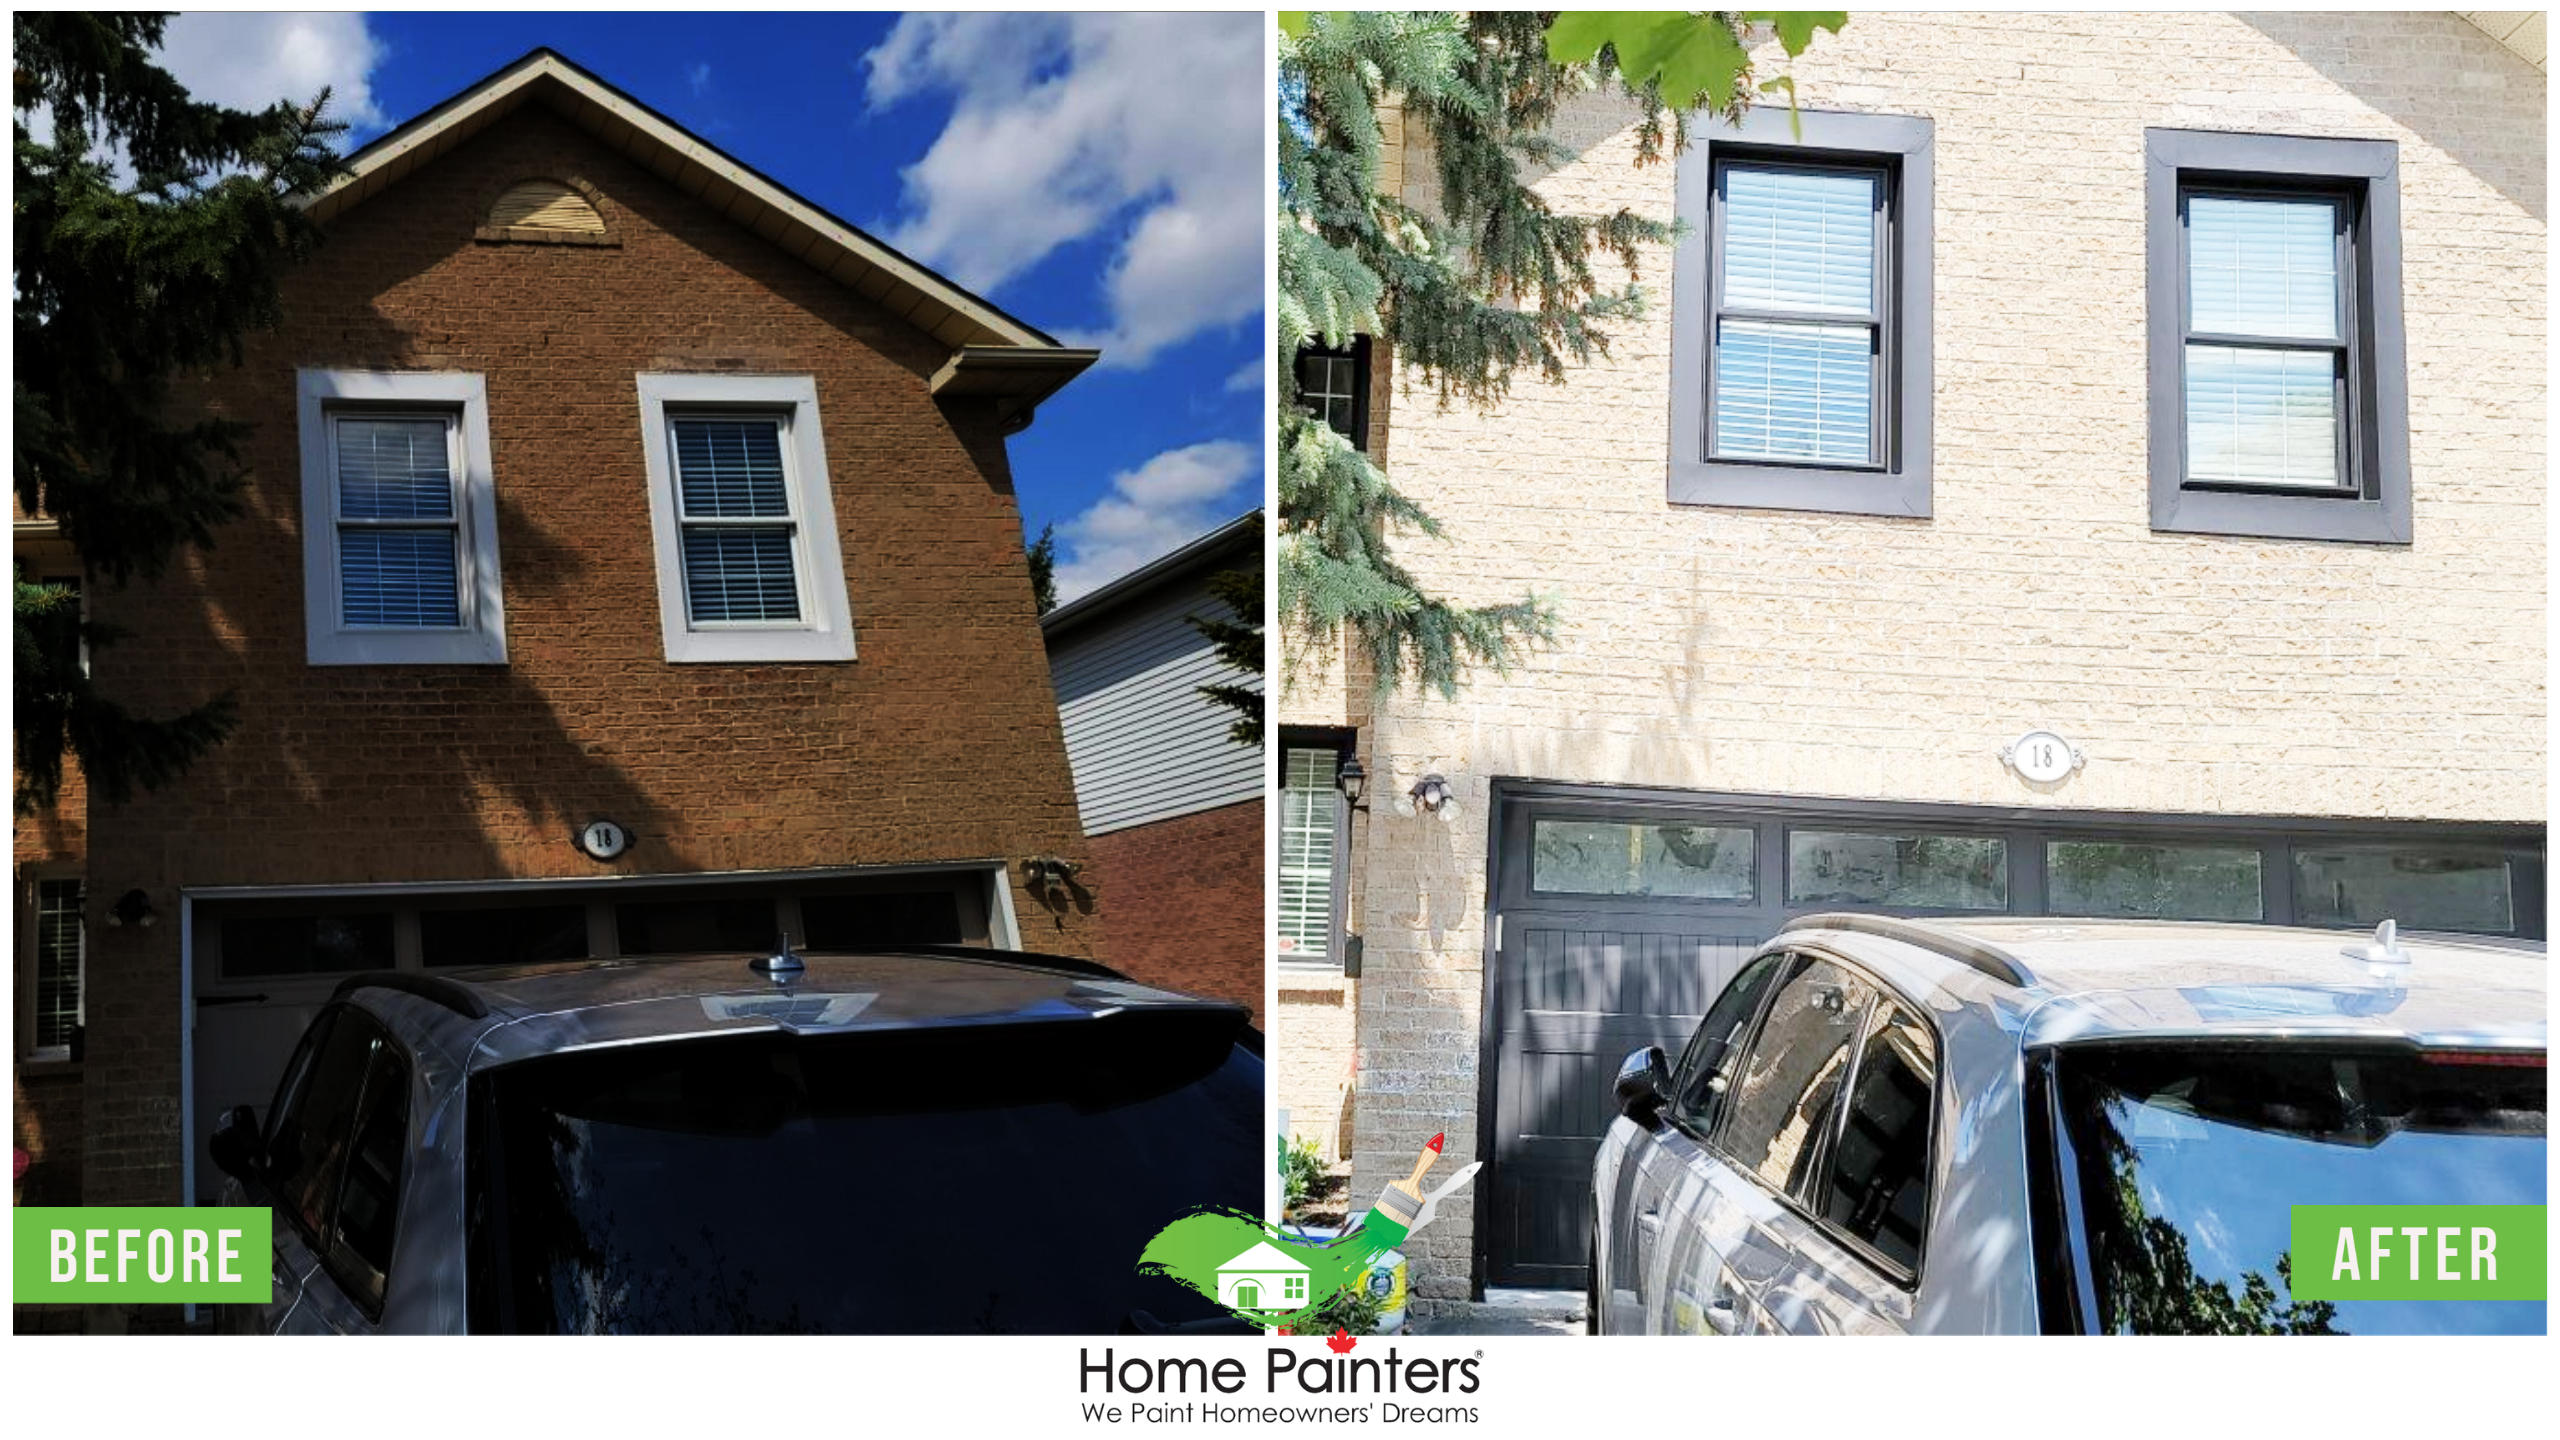 Before and after picture for Vinyl window and siding by Home painters toronto